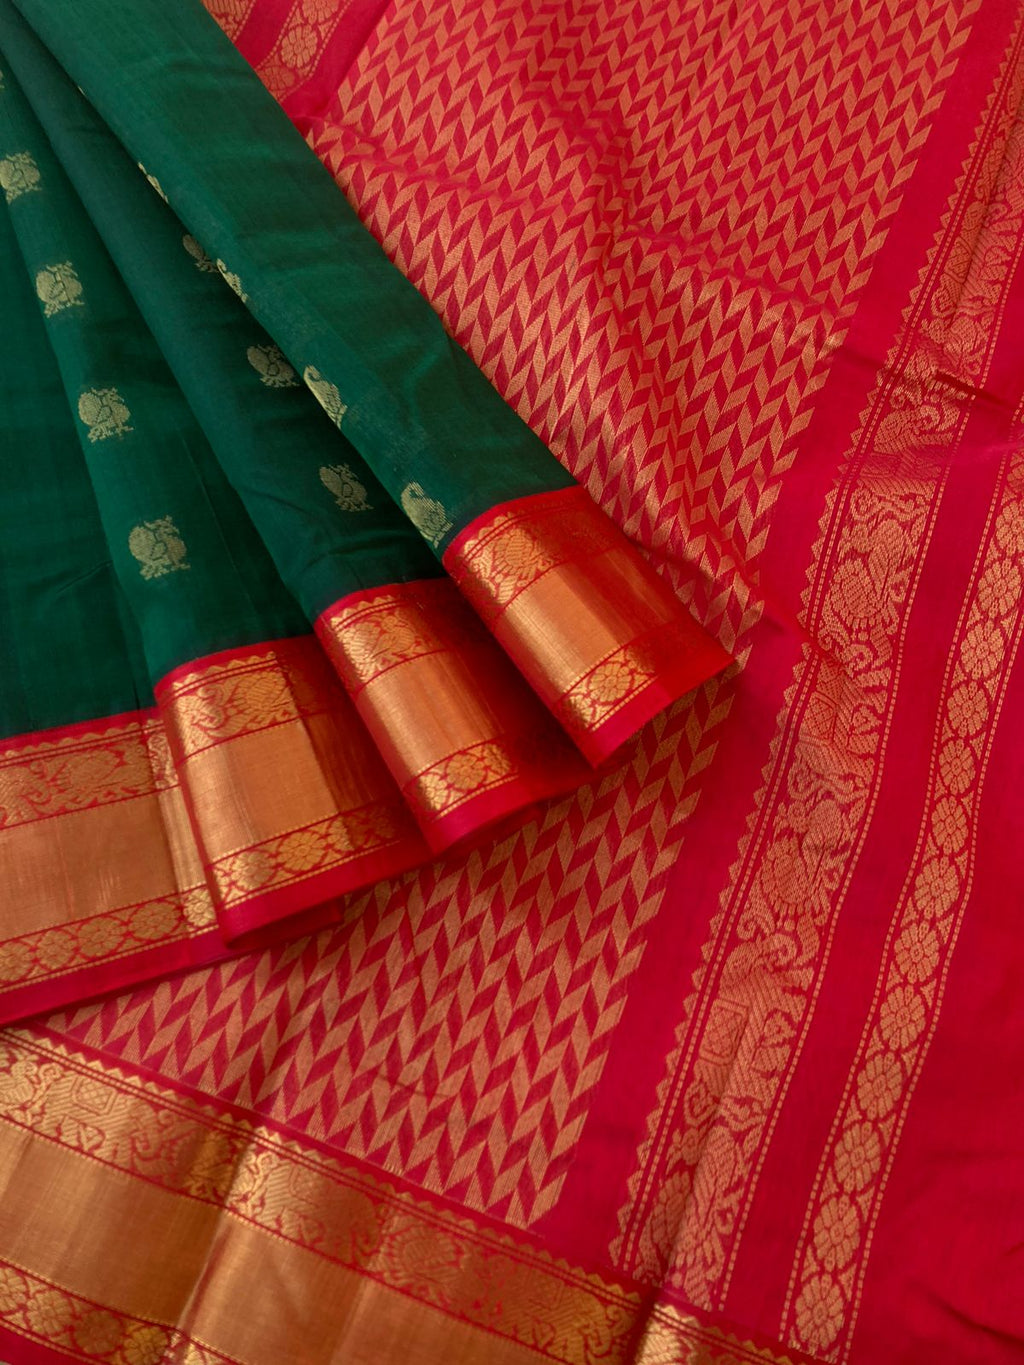 Korvai Silk Cottons - Meenakshi green and red